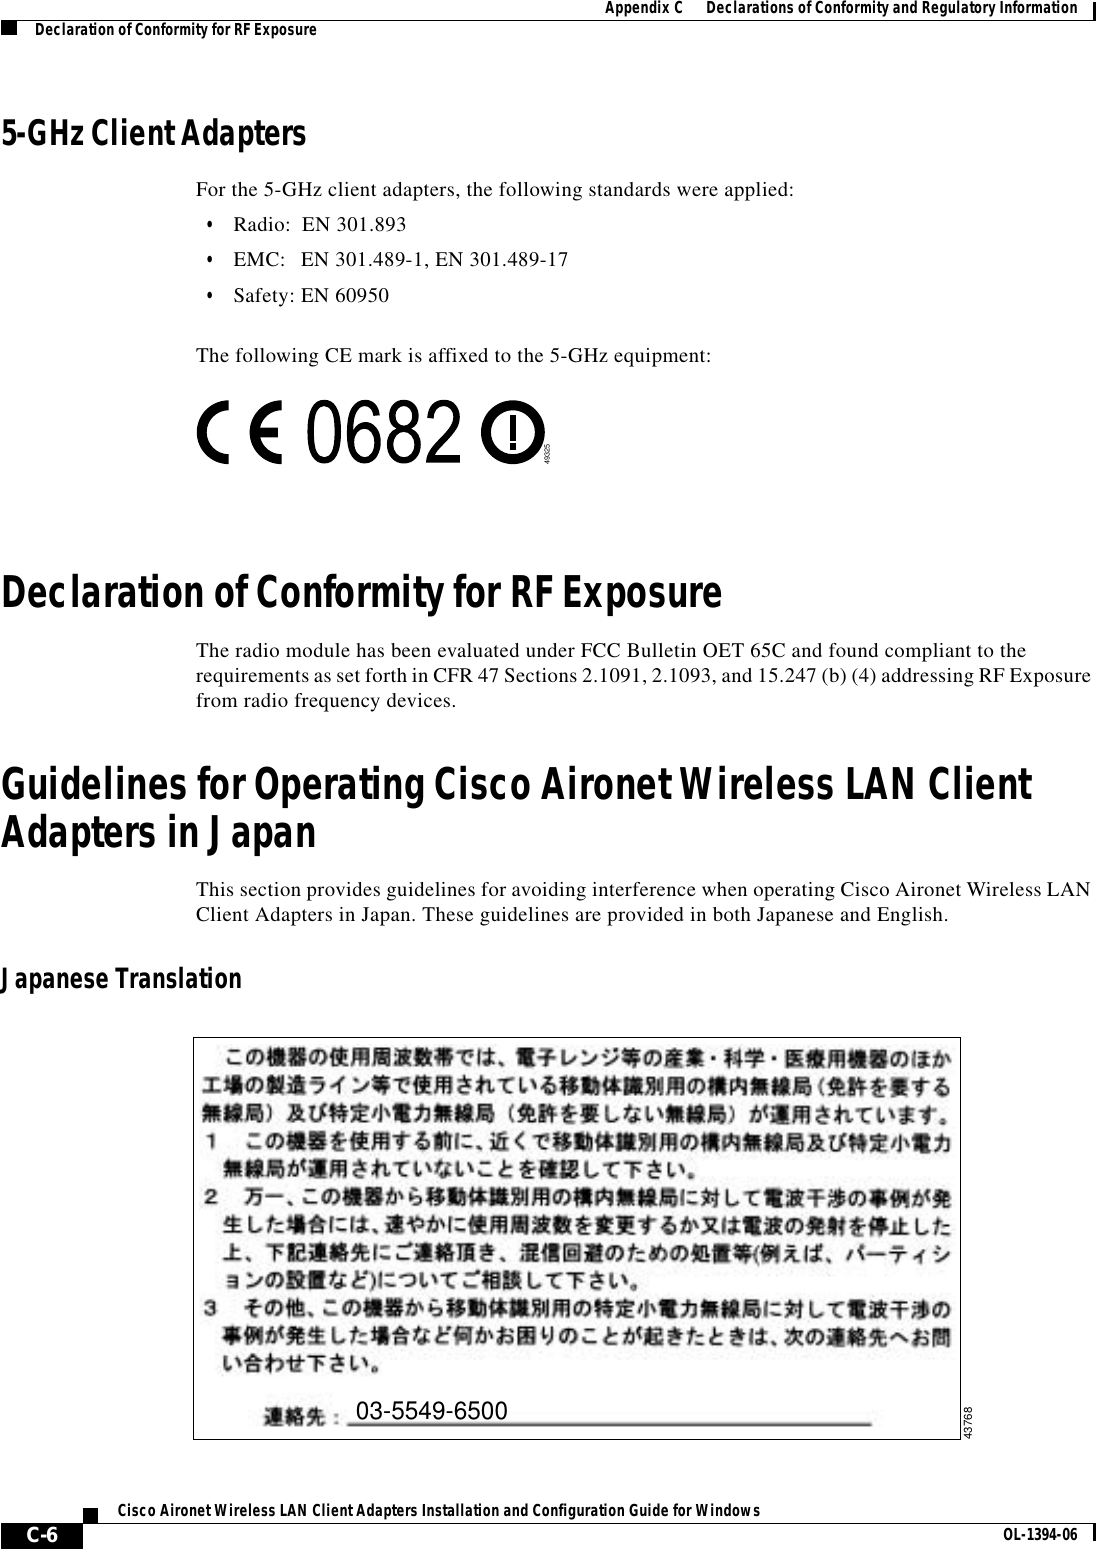 C-6Cisco Aironet Wireless LAN Client Adapters Installation and Configuration Guide for Windows OL-1394-06Appendix C      Declarations of Conformity and Regulatory InformationDeclaration of Conformity for RF Exposure5-GHz Client AdaptersFor the 5-GHz client adapters, the following standards were applied:•Radio: EN 301.893•EMC: EN 301.489-1, EN 301.489-17•Safety: EN 60950The following CE mark is affixed to the 5-GHz equipment:Declaration of Conformity for RF ExposureThe radio module has been evaluated under FCC Bulletin OET 65C and found compliant to the requirements as set forth in CFR 47 Sections 2.1091, 2.1093, and 15.247 (b) (4) addressing RF Exposure from radio frequency devices.Guidelines for Operating Cisco Aironet Wireless LAN Client Adapters in JapanThis section provides guidelines for avoiding interference when operating Cisco Aironet Wireless LAN Client Adapters in Japan. These guidelines are provided in both Japanese and English.Japanese Translation4932503-5549-650043768